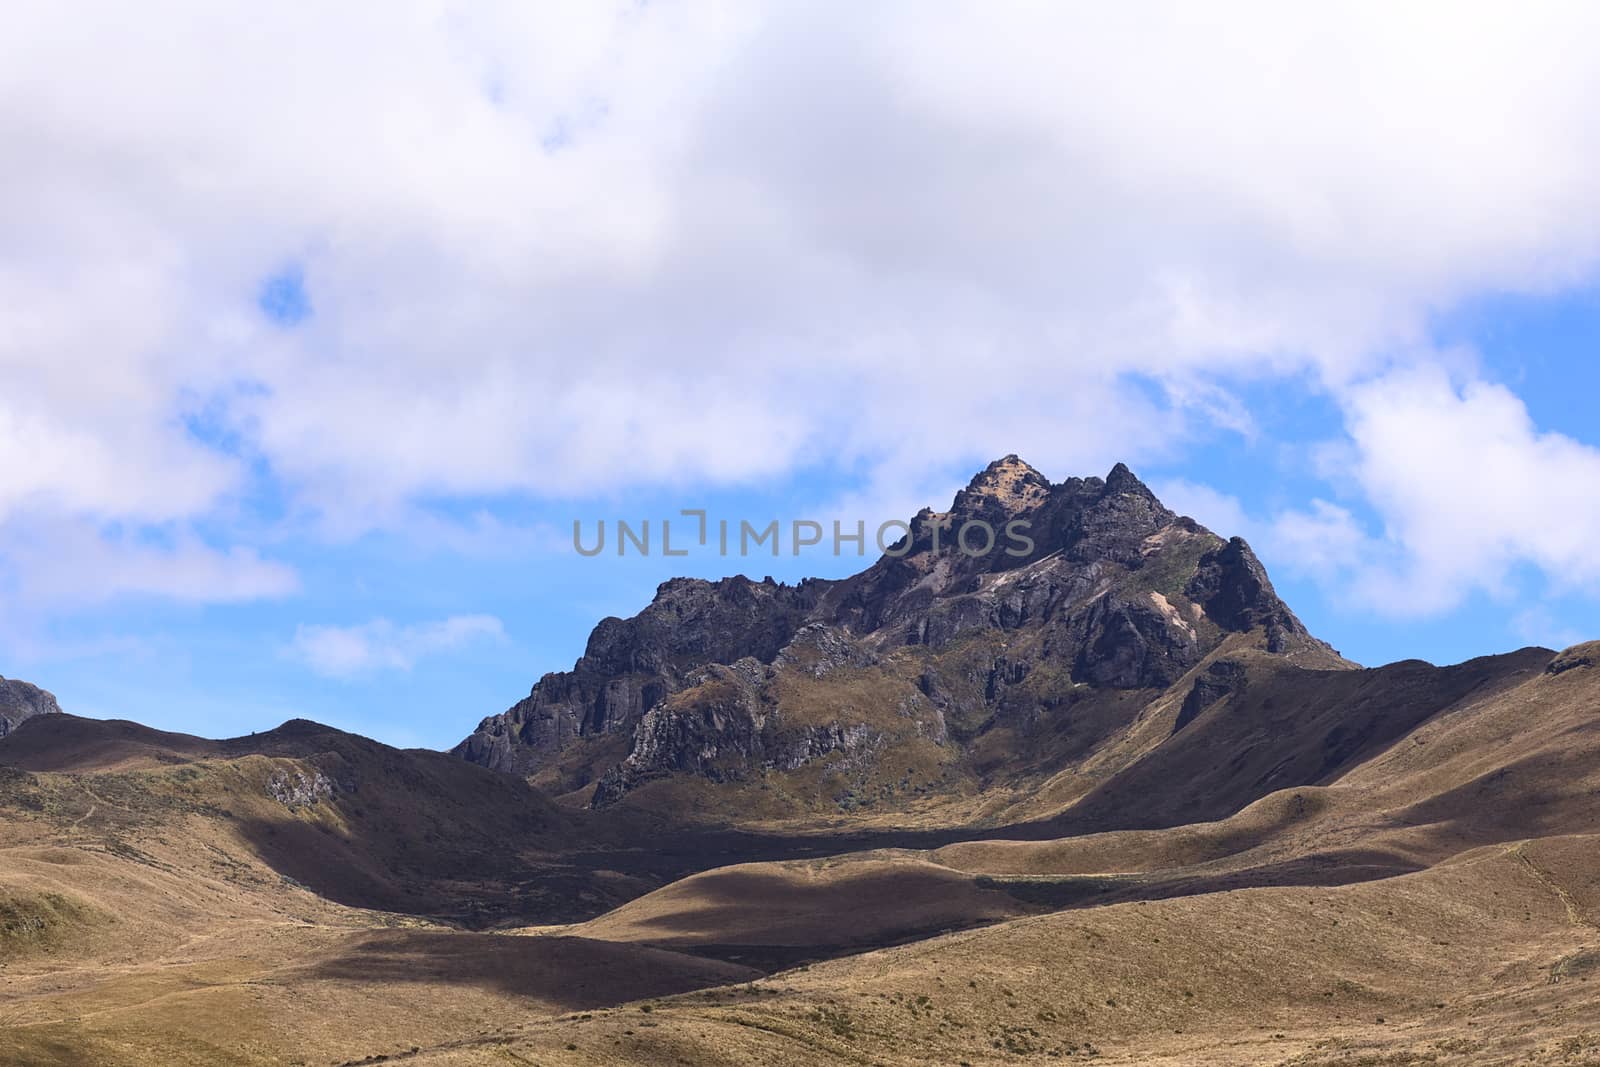 Ruku Pichincha mountain along the Western edge of Quito, Ecuador. The TeleferiQo cablecar goes up to the Cruz Loma lookout on the Pichincha mountain complex from where there is a hiking trail to the peak.